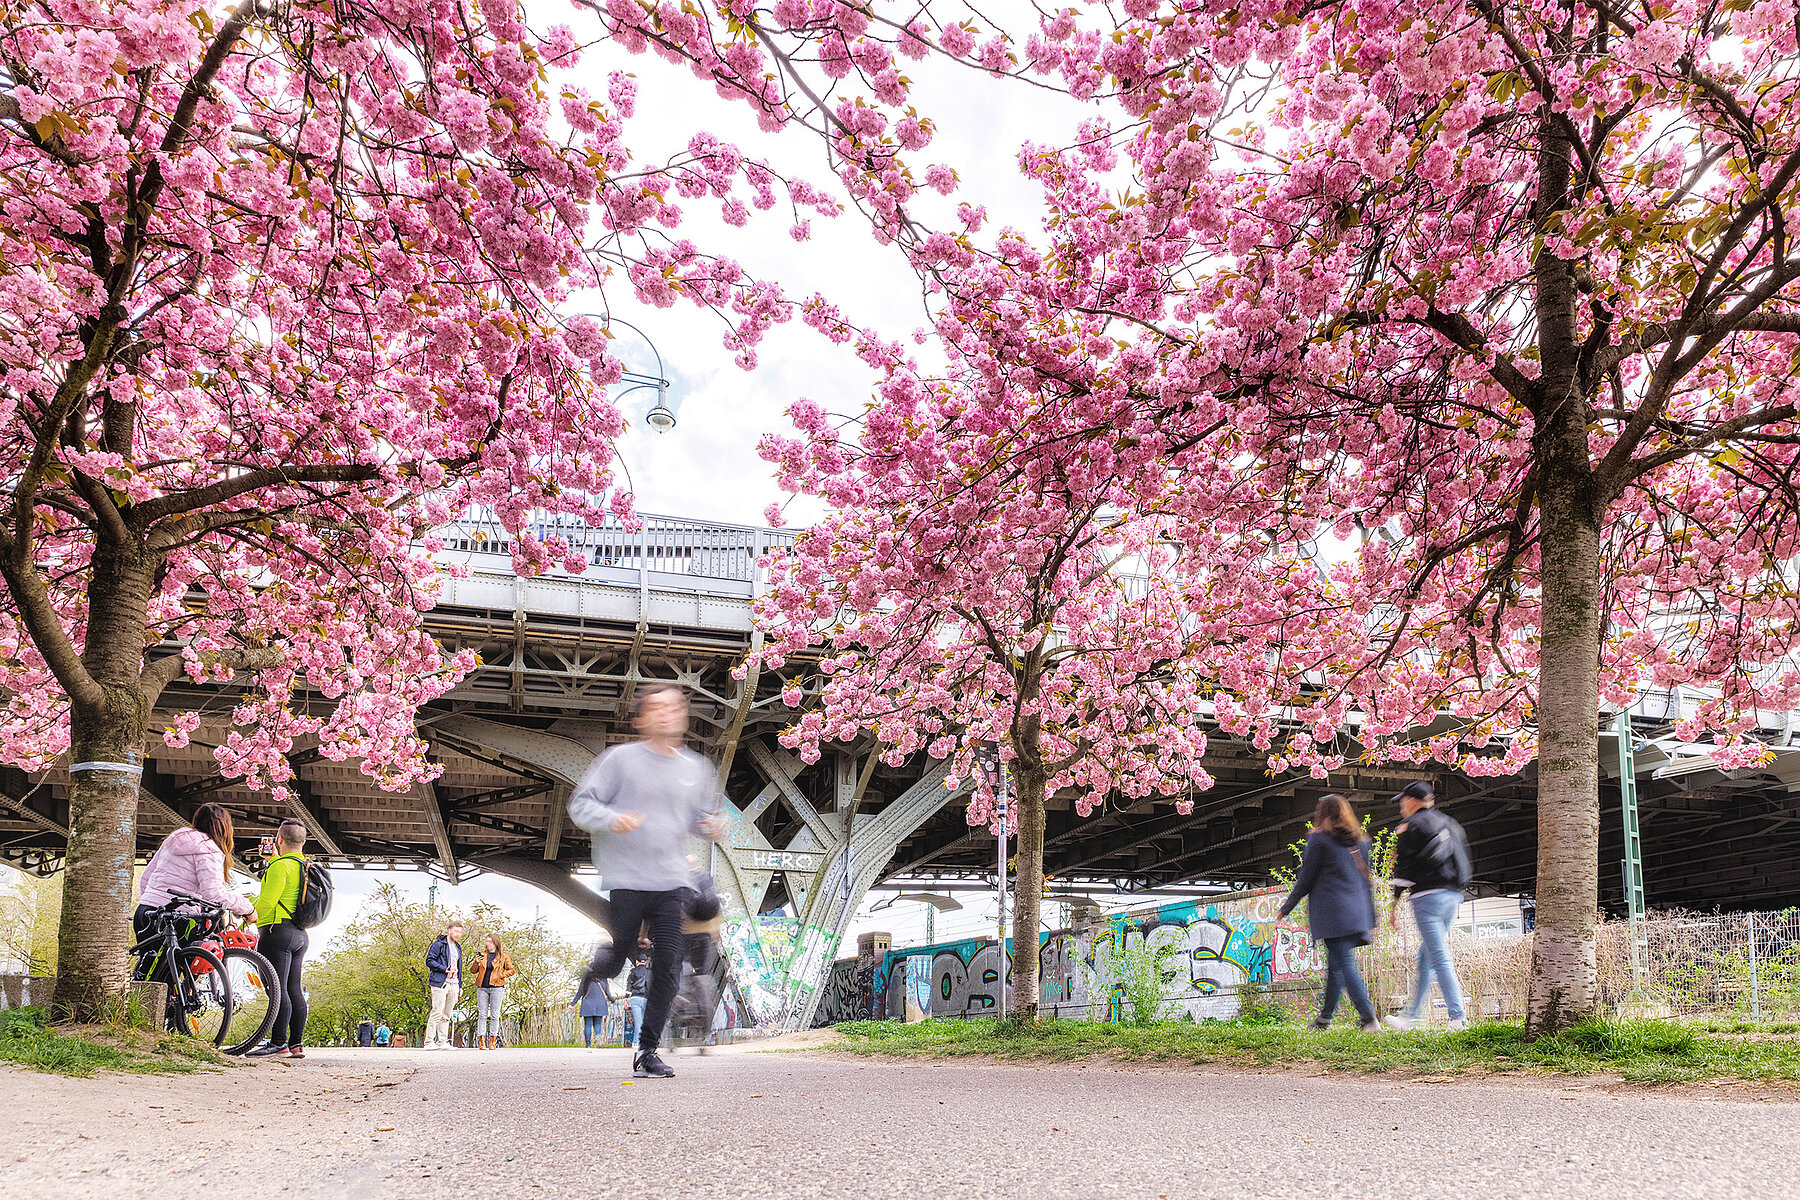 A jogger runs down an avenue of pink flowering cherry trees, with the Bösebrücke in the background.